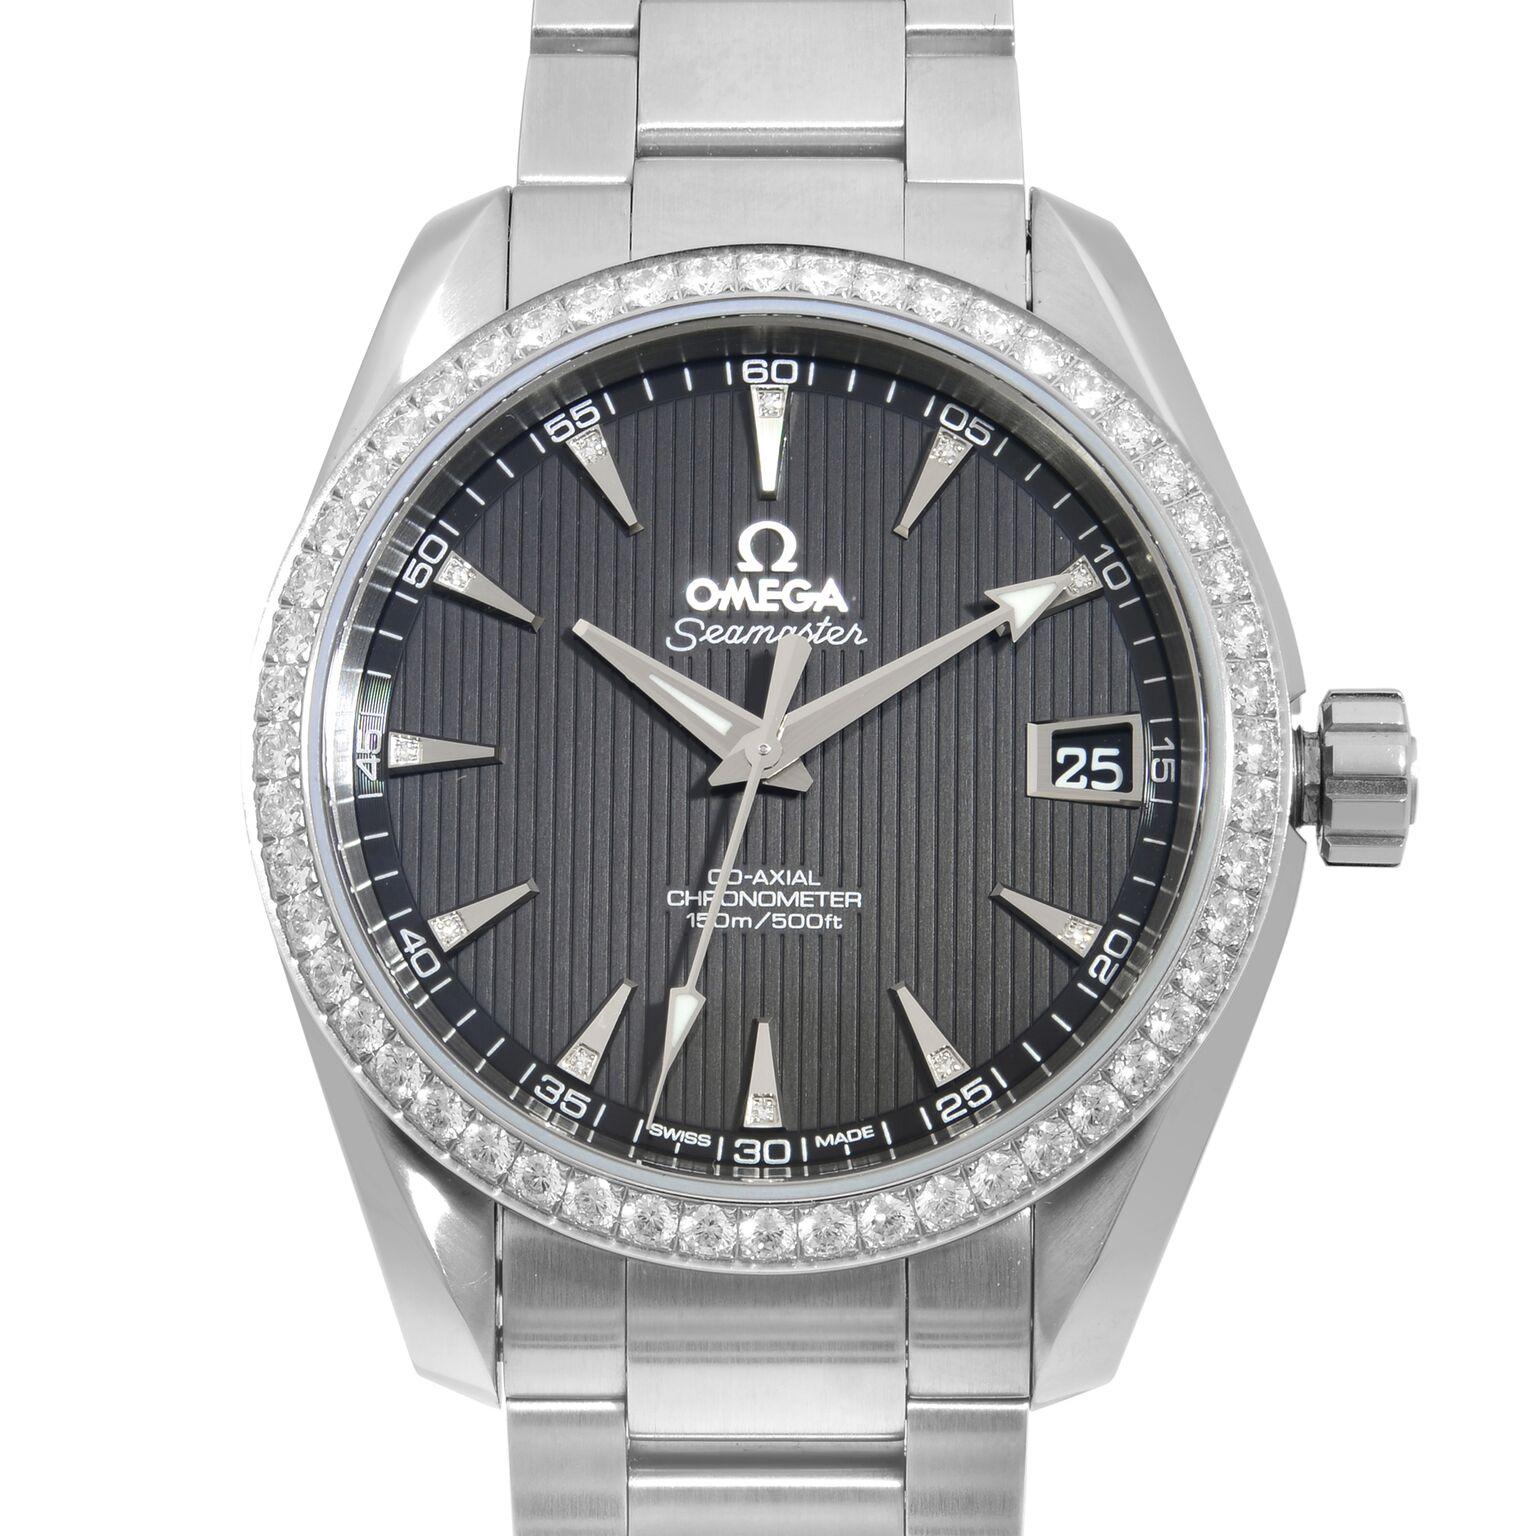 This brand new Omega Seamaster 231.15.39.21.51.001. This watch comes with the original box and papers. 

Movement Type	Mechanical (Automatic)
Movement Caliber	Omega Calibre 8500
Complications	Date Indicator, Diamonds
Gender	Unisex
Case